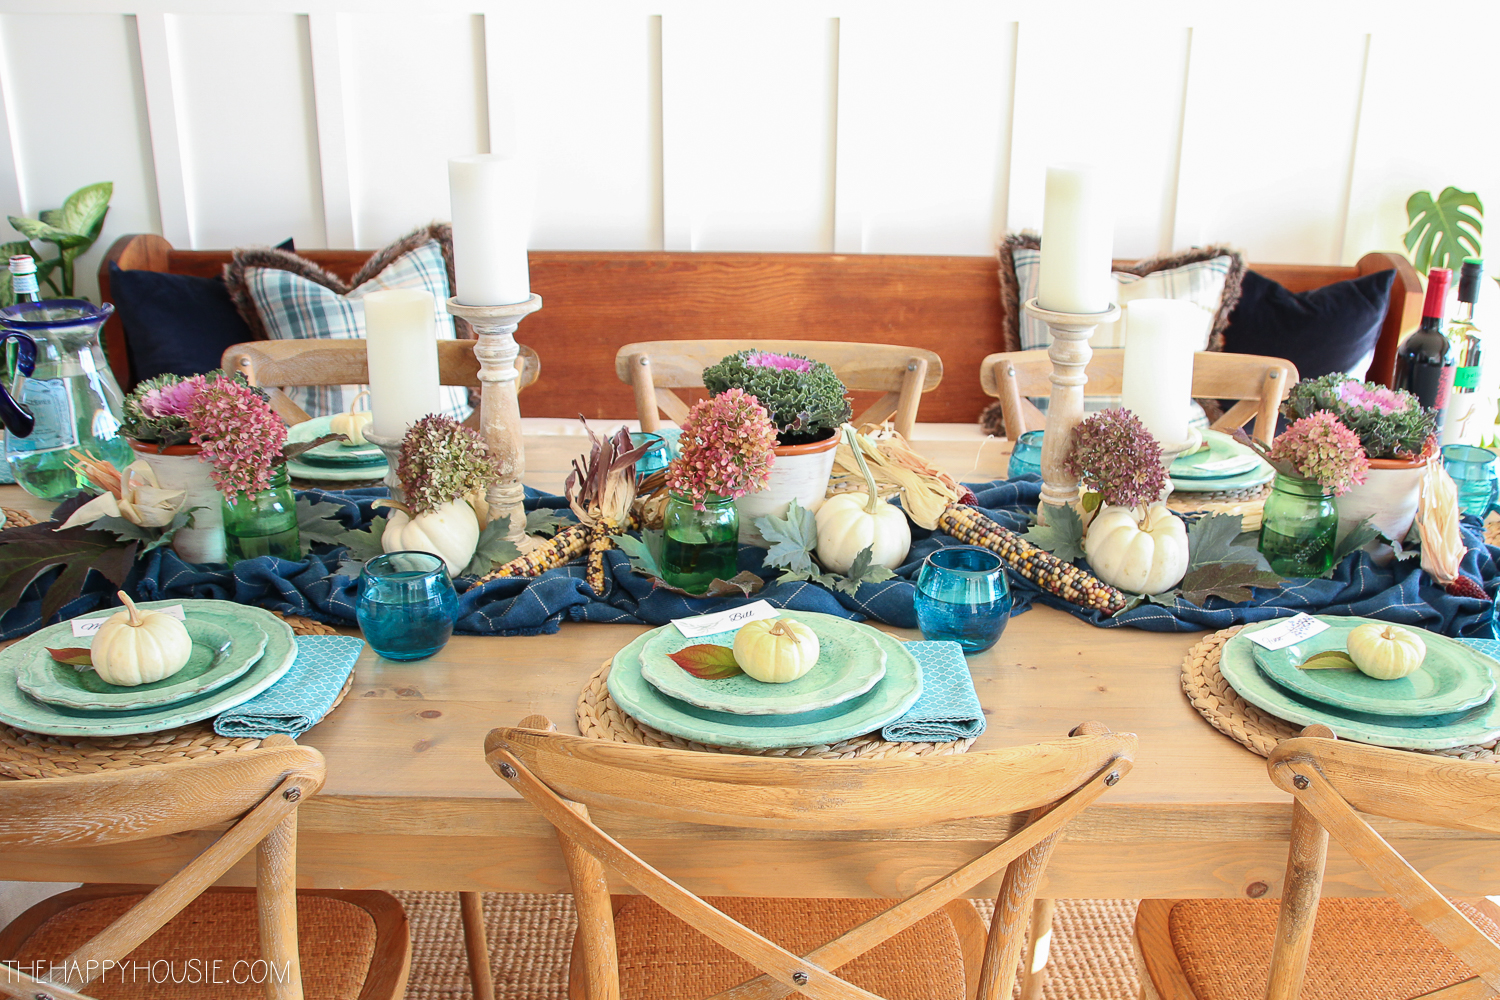 Blue plates, hydrangeas and candles are on the table.